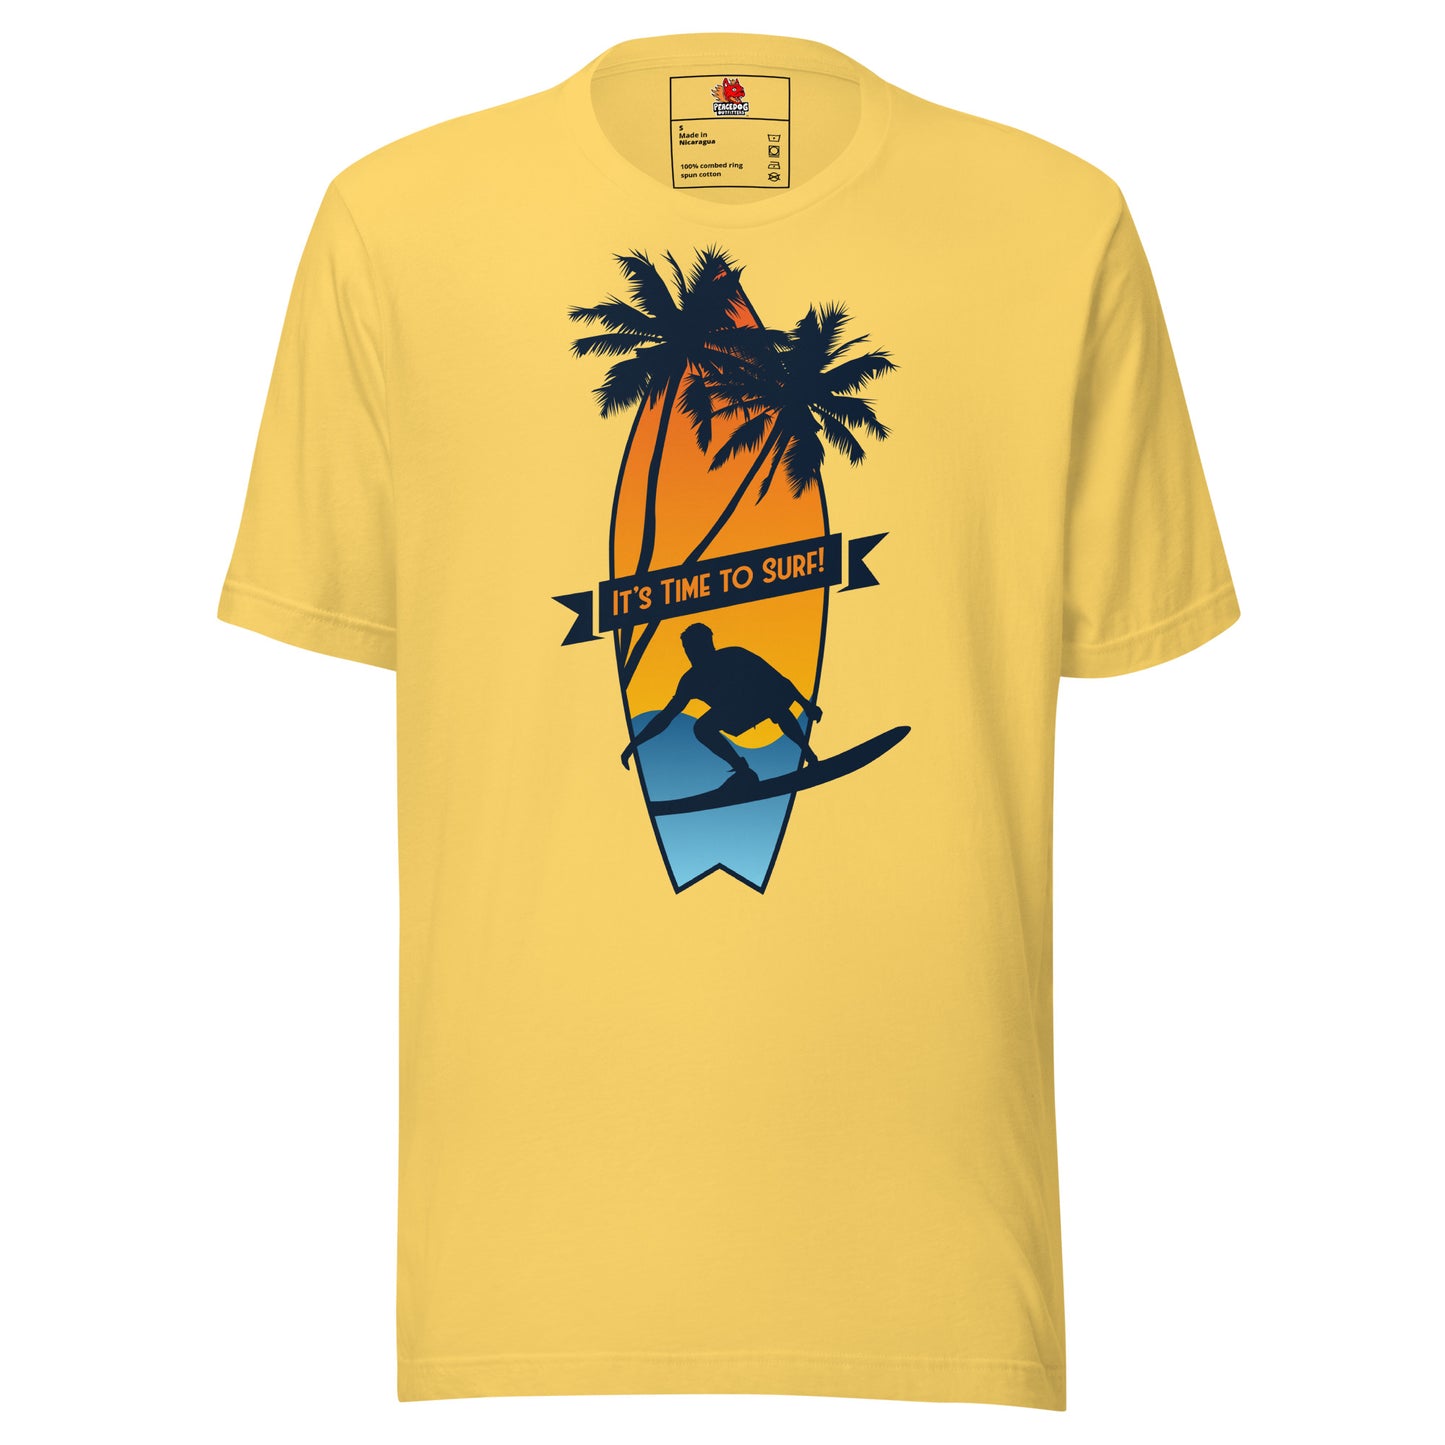 It's Time to Surf T-Shirt